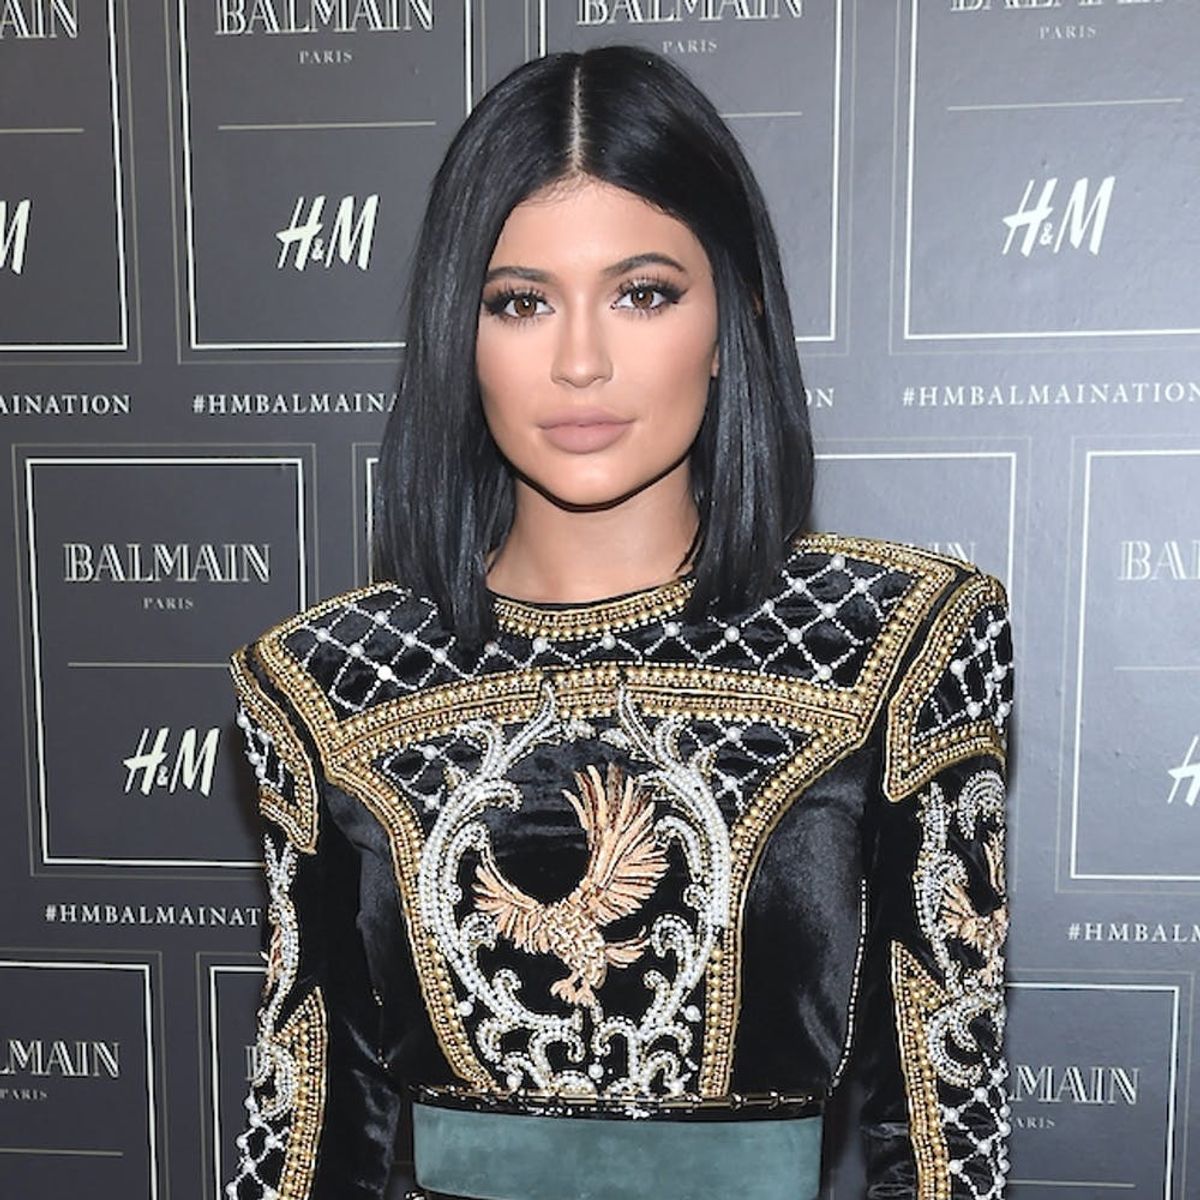 Kylie Jenner’s New Hair Accessory Is About to Be a Major Trend